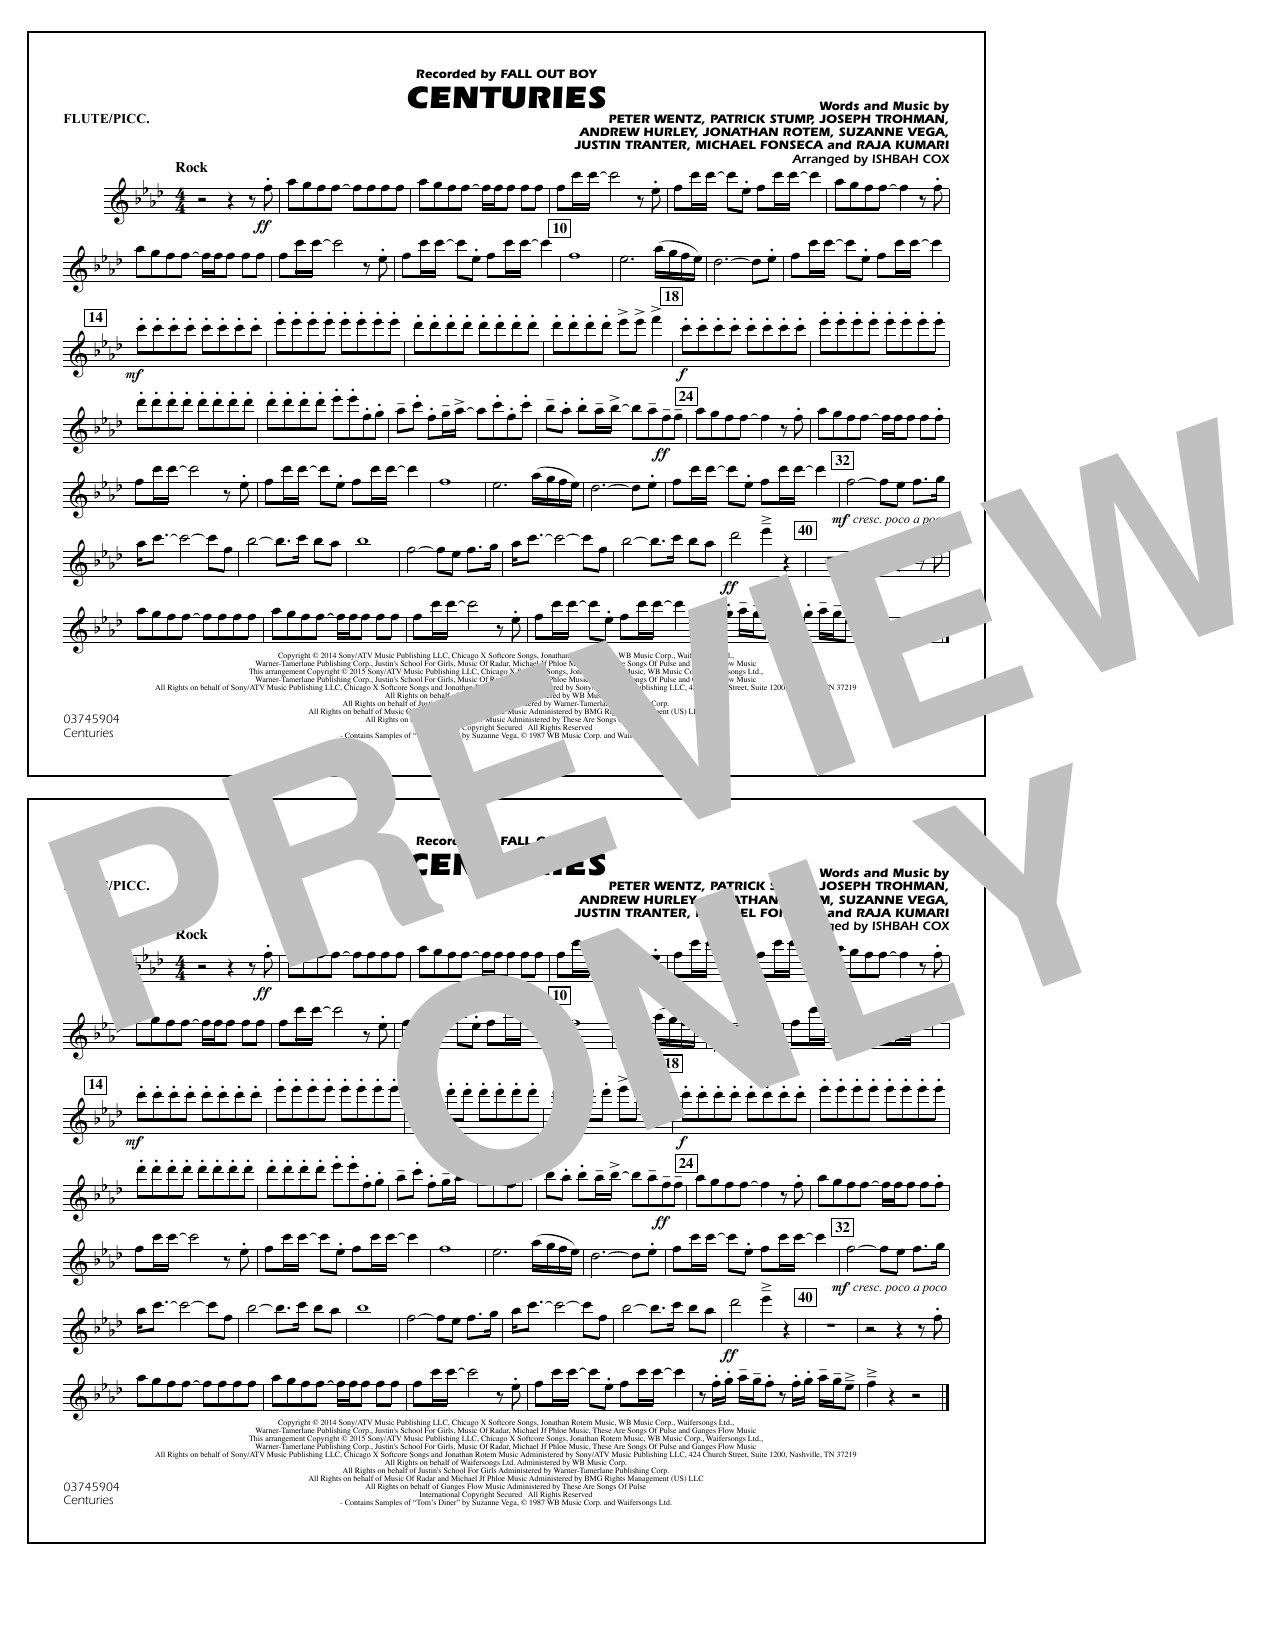 Ishbah Cox Centuries Flute Piccolo Chords Sheet Music Notes